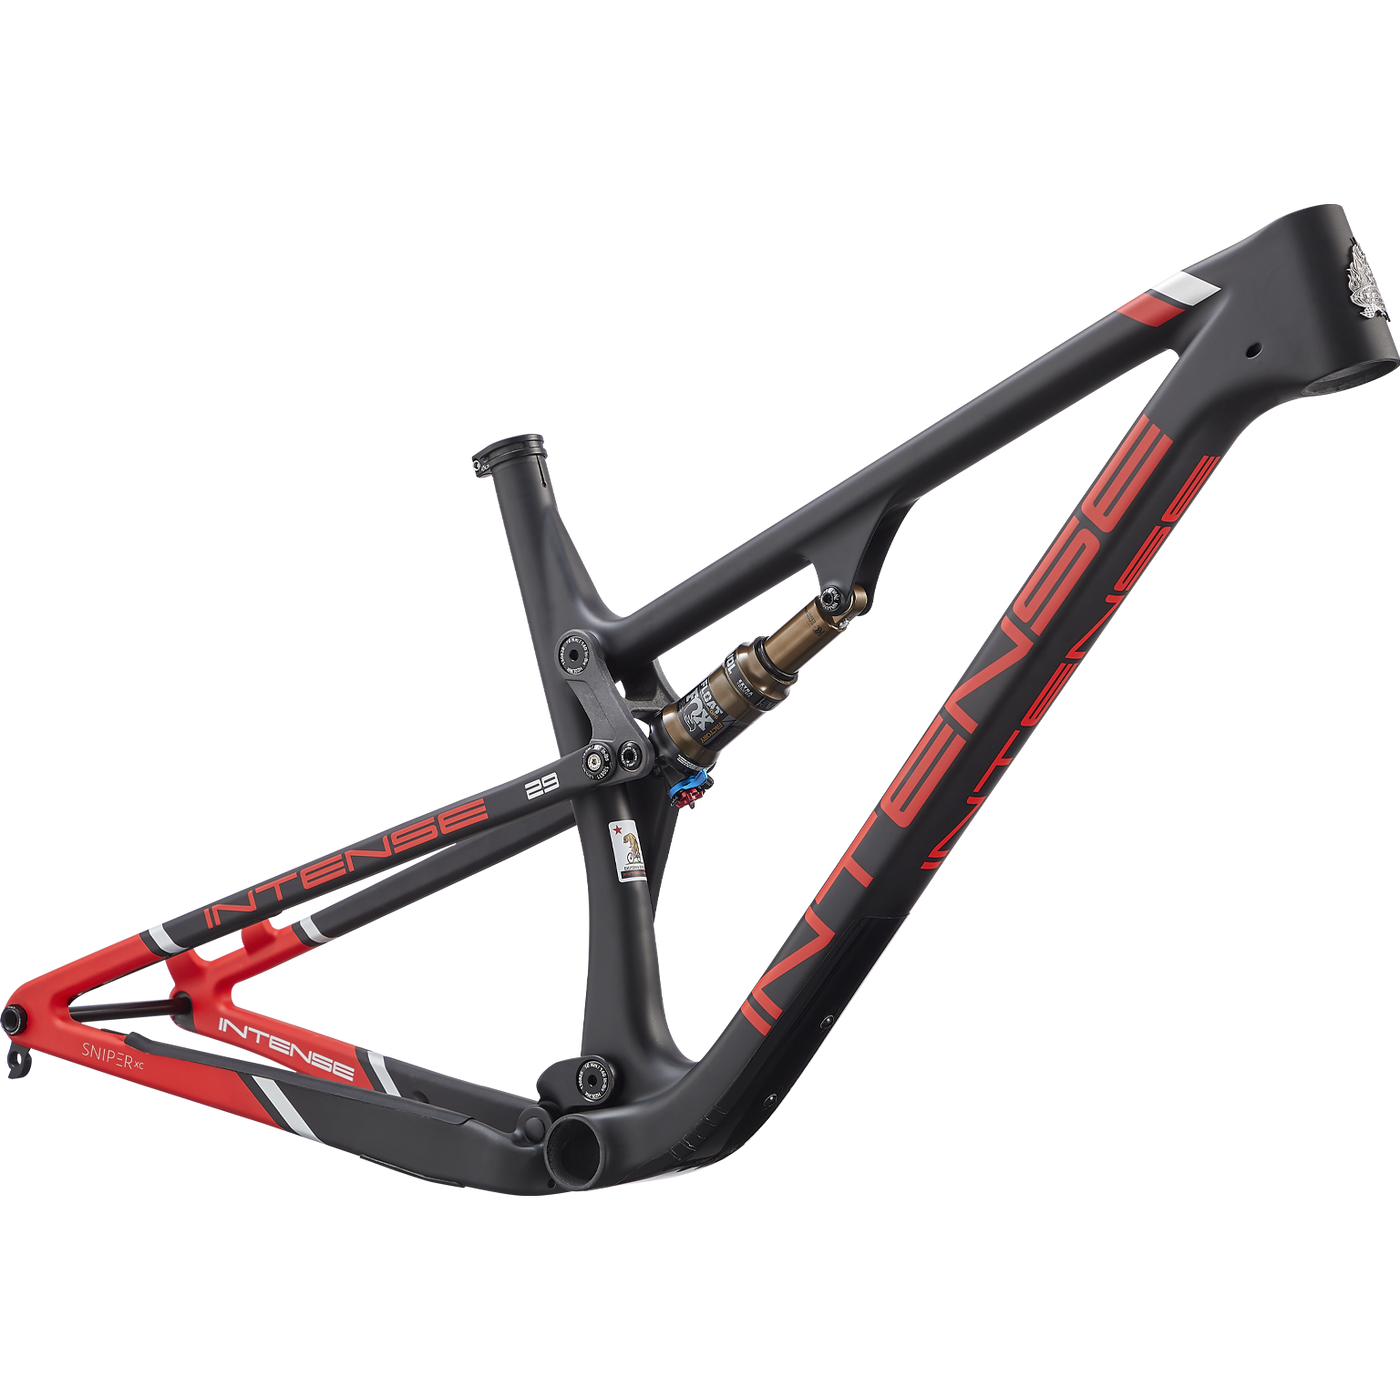 Shop INTENSE CYCLES Sniper T Carbon Cross country mountain bike for sale online